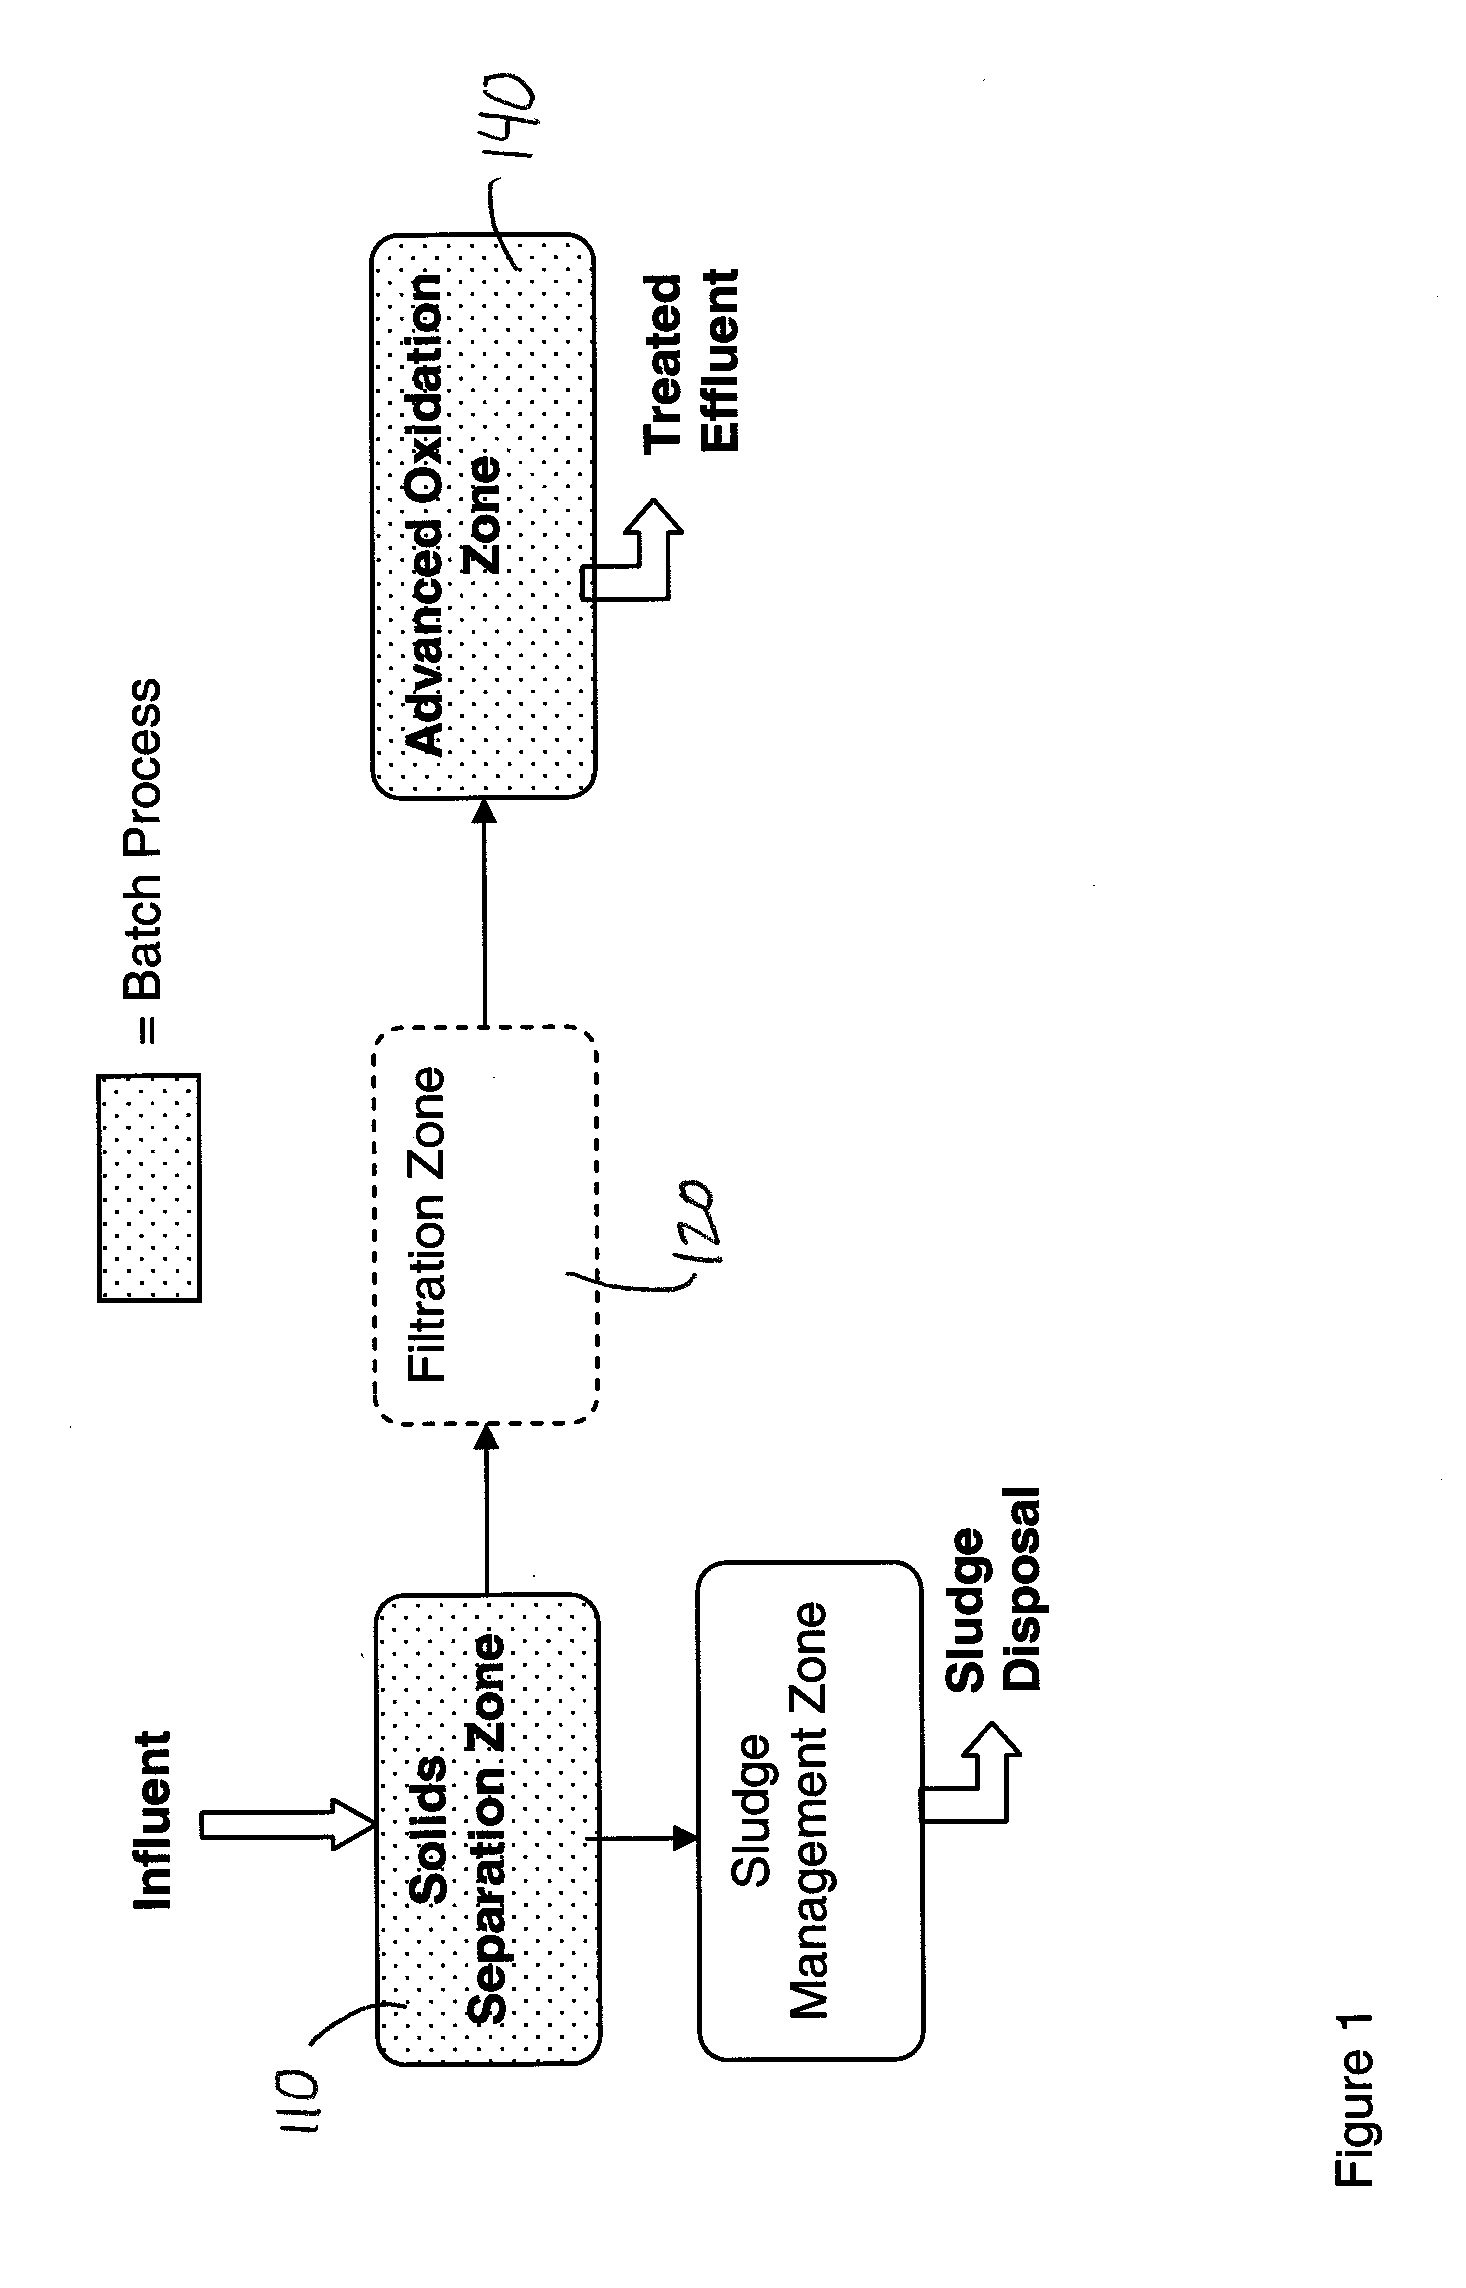 Method and Apparatus for Sequenced Batch Advanced Oxidation Wastewater Treatment